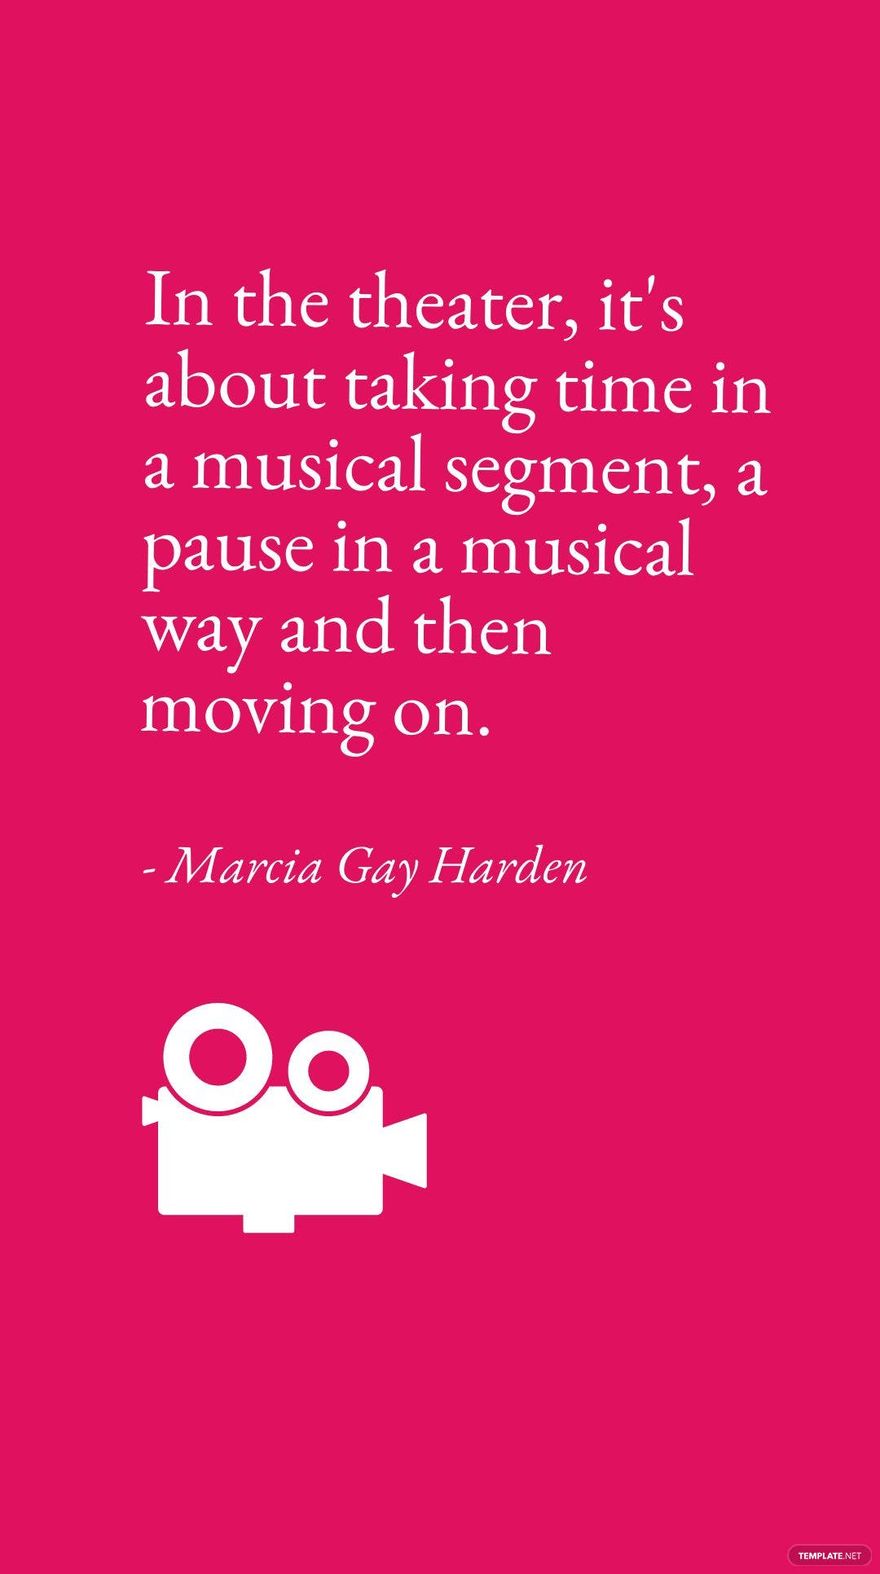 Free Marcia Gay Harden -In the theater, it's about taking time in a musical segment, a pause in a musical way and then moving on.